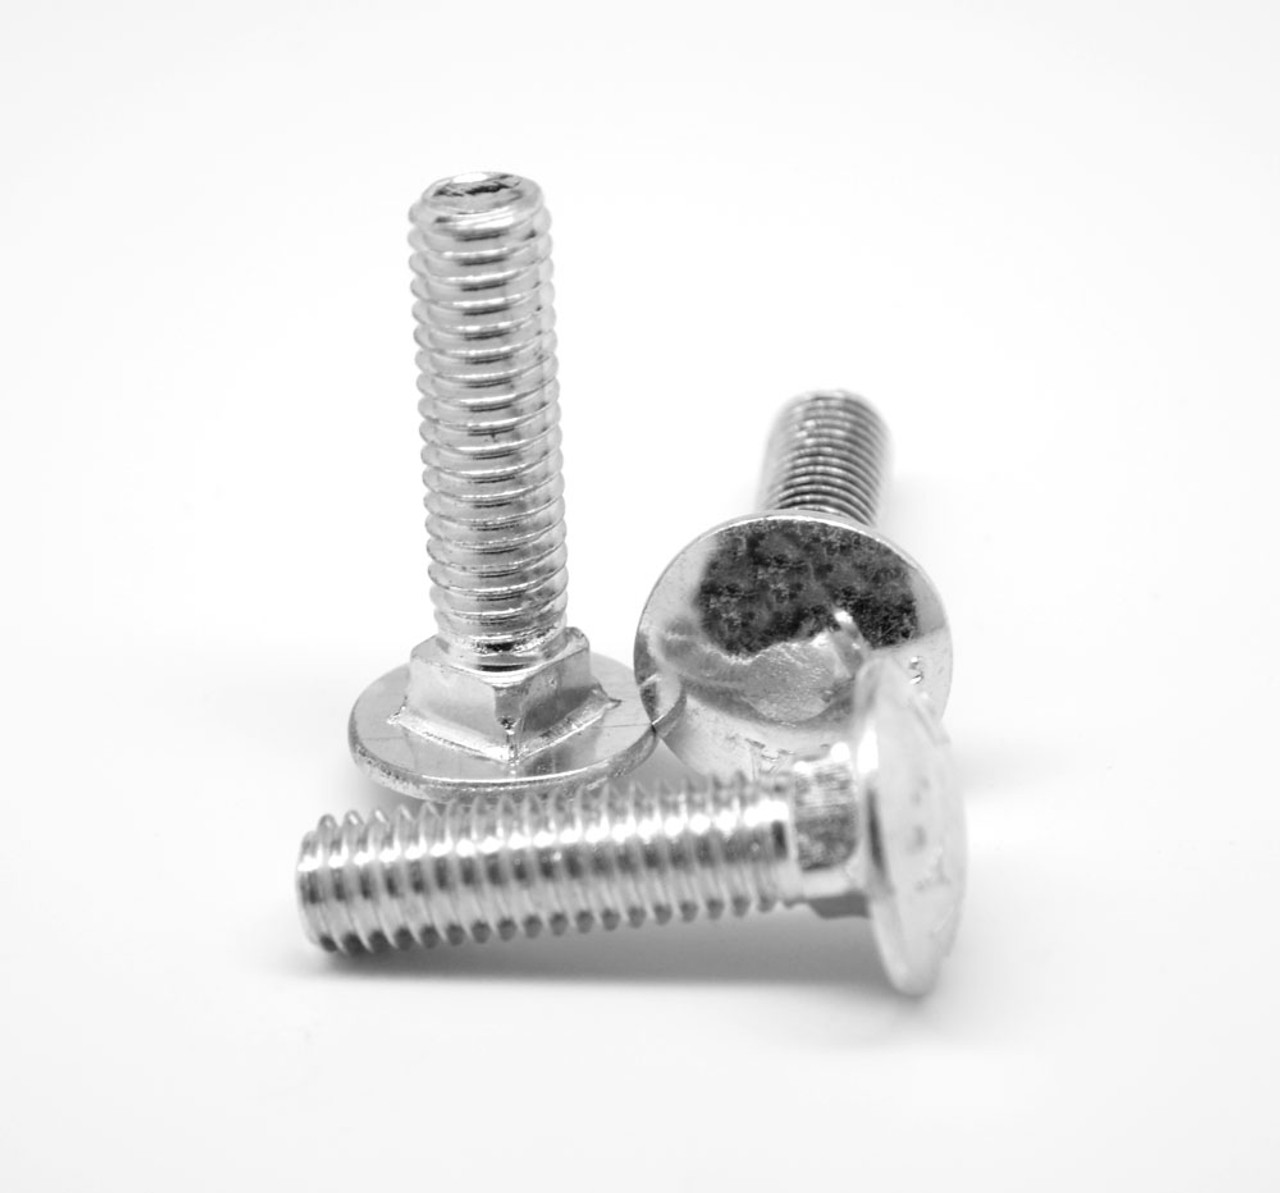 1/2"-13 x 5 1/2" (FT) Coarse Thread A307 Grade A Carriage Bolt Low Carbon Steel Zinc Plated